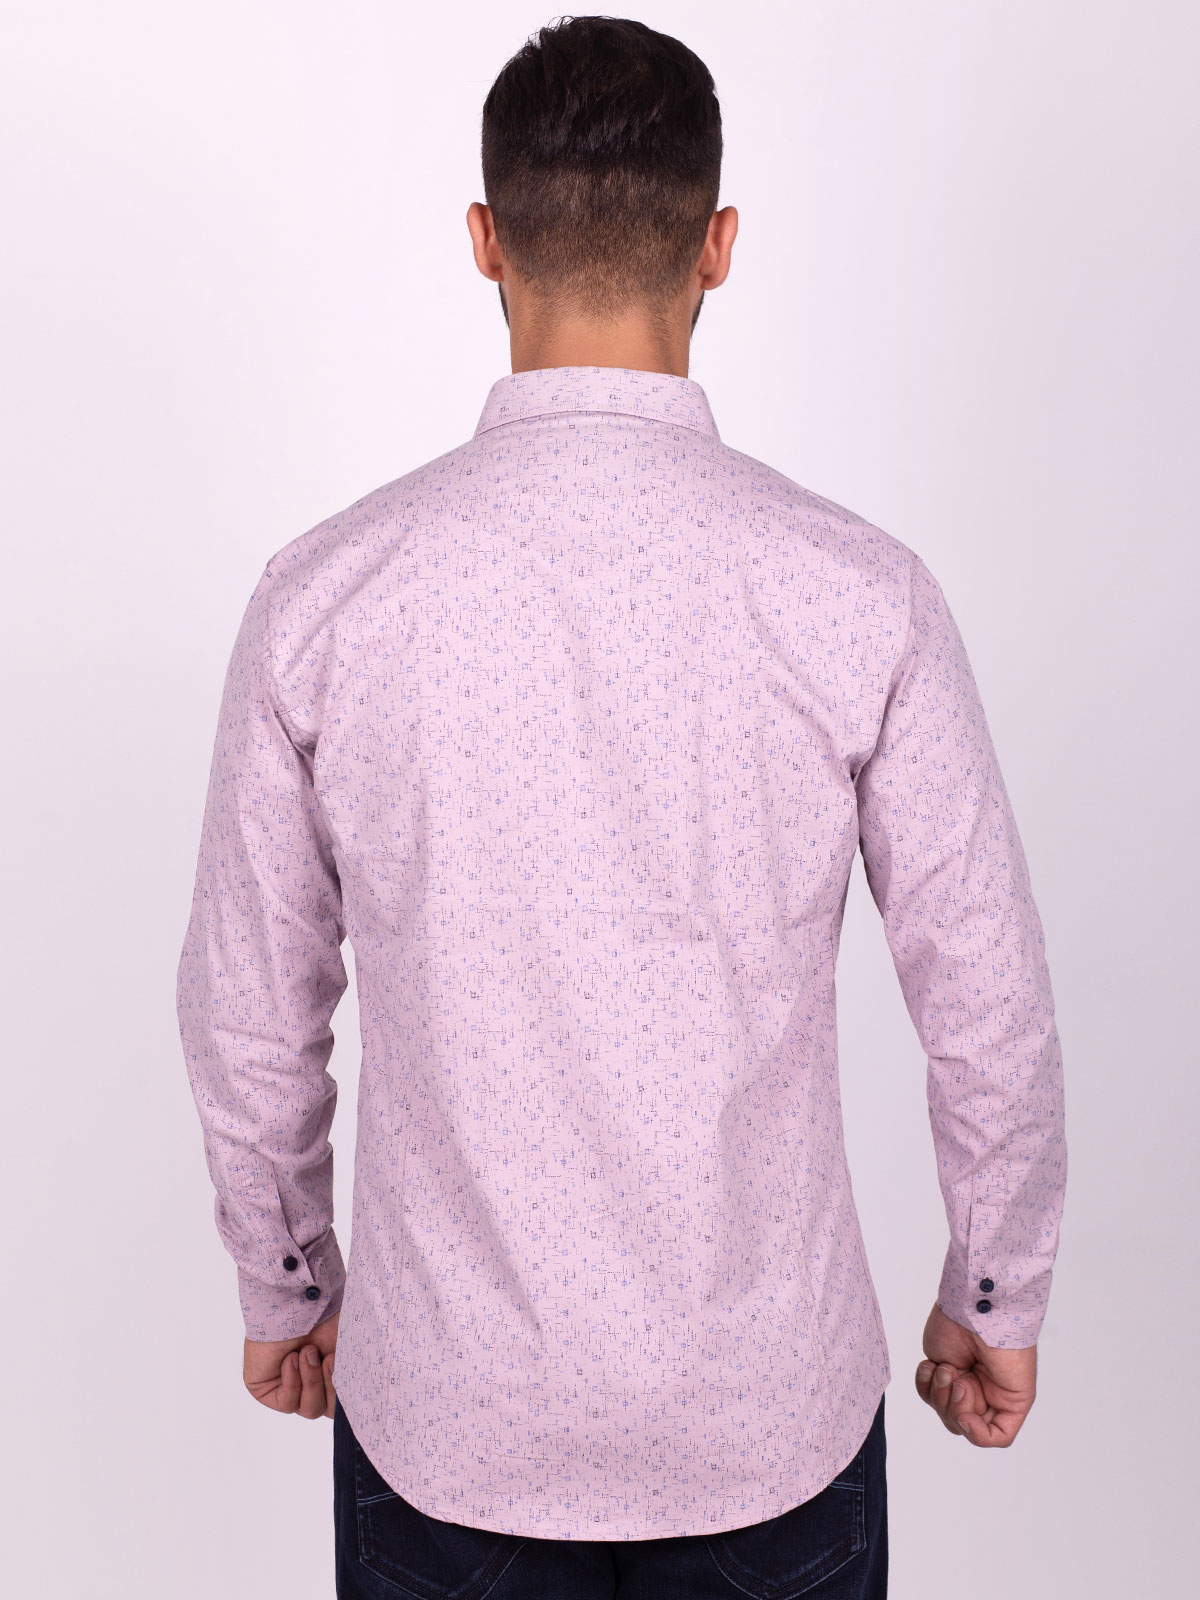 Shirt in light purple with a print of fi - 21516 € 41.62 img4